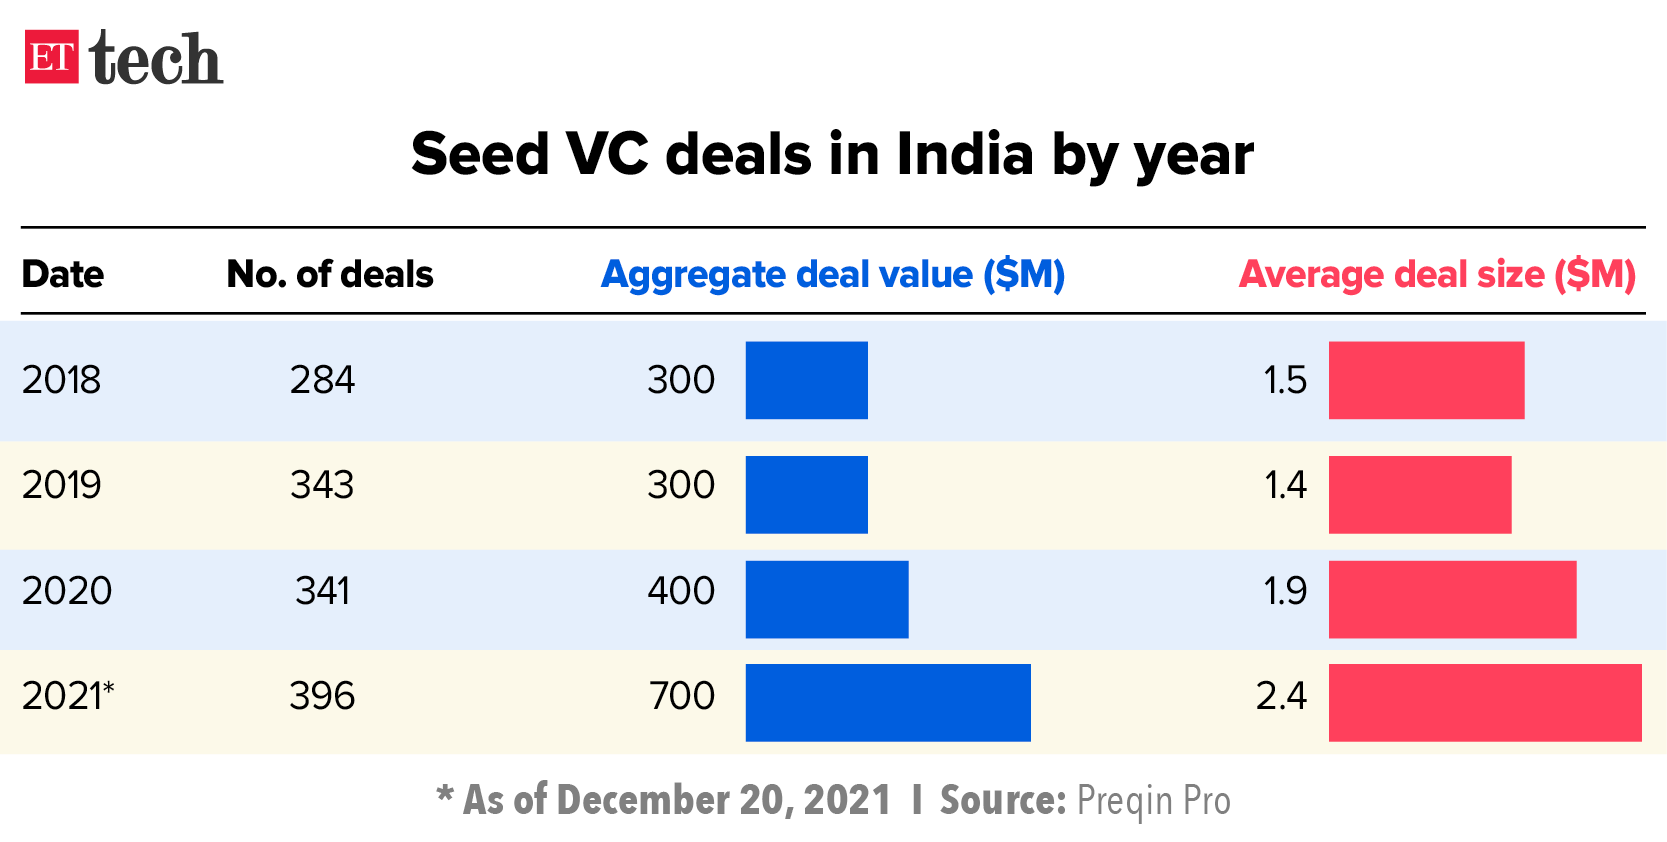 Seed VC deals in India